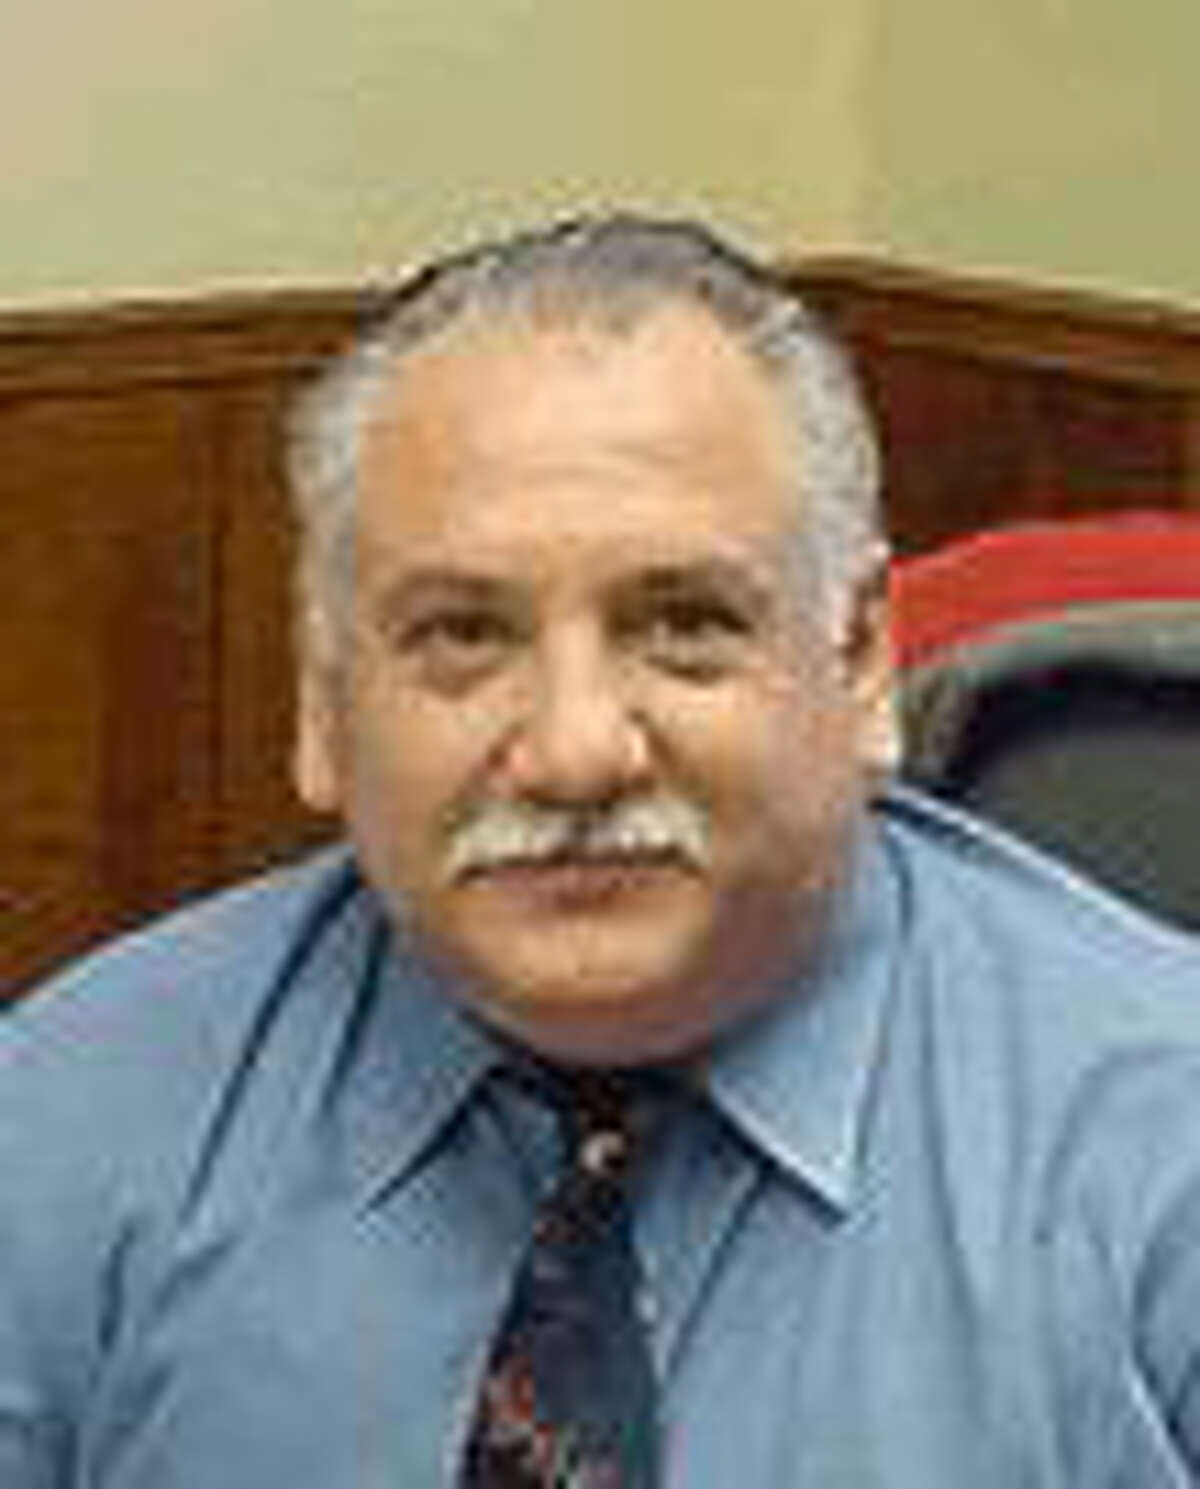 Bernie Morin Jr., Northside ISD's former director of maintenance and operations, seen in this undated photo from the NISD website, resigned in May 2011 after an audit found he allegedly violated procurement procedures. The Bexar County District Attorney's office is investigating the alleged misconduct.